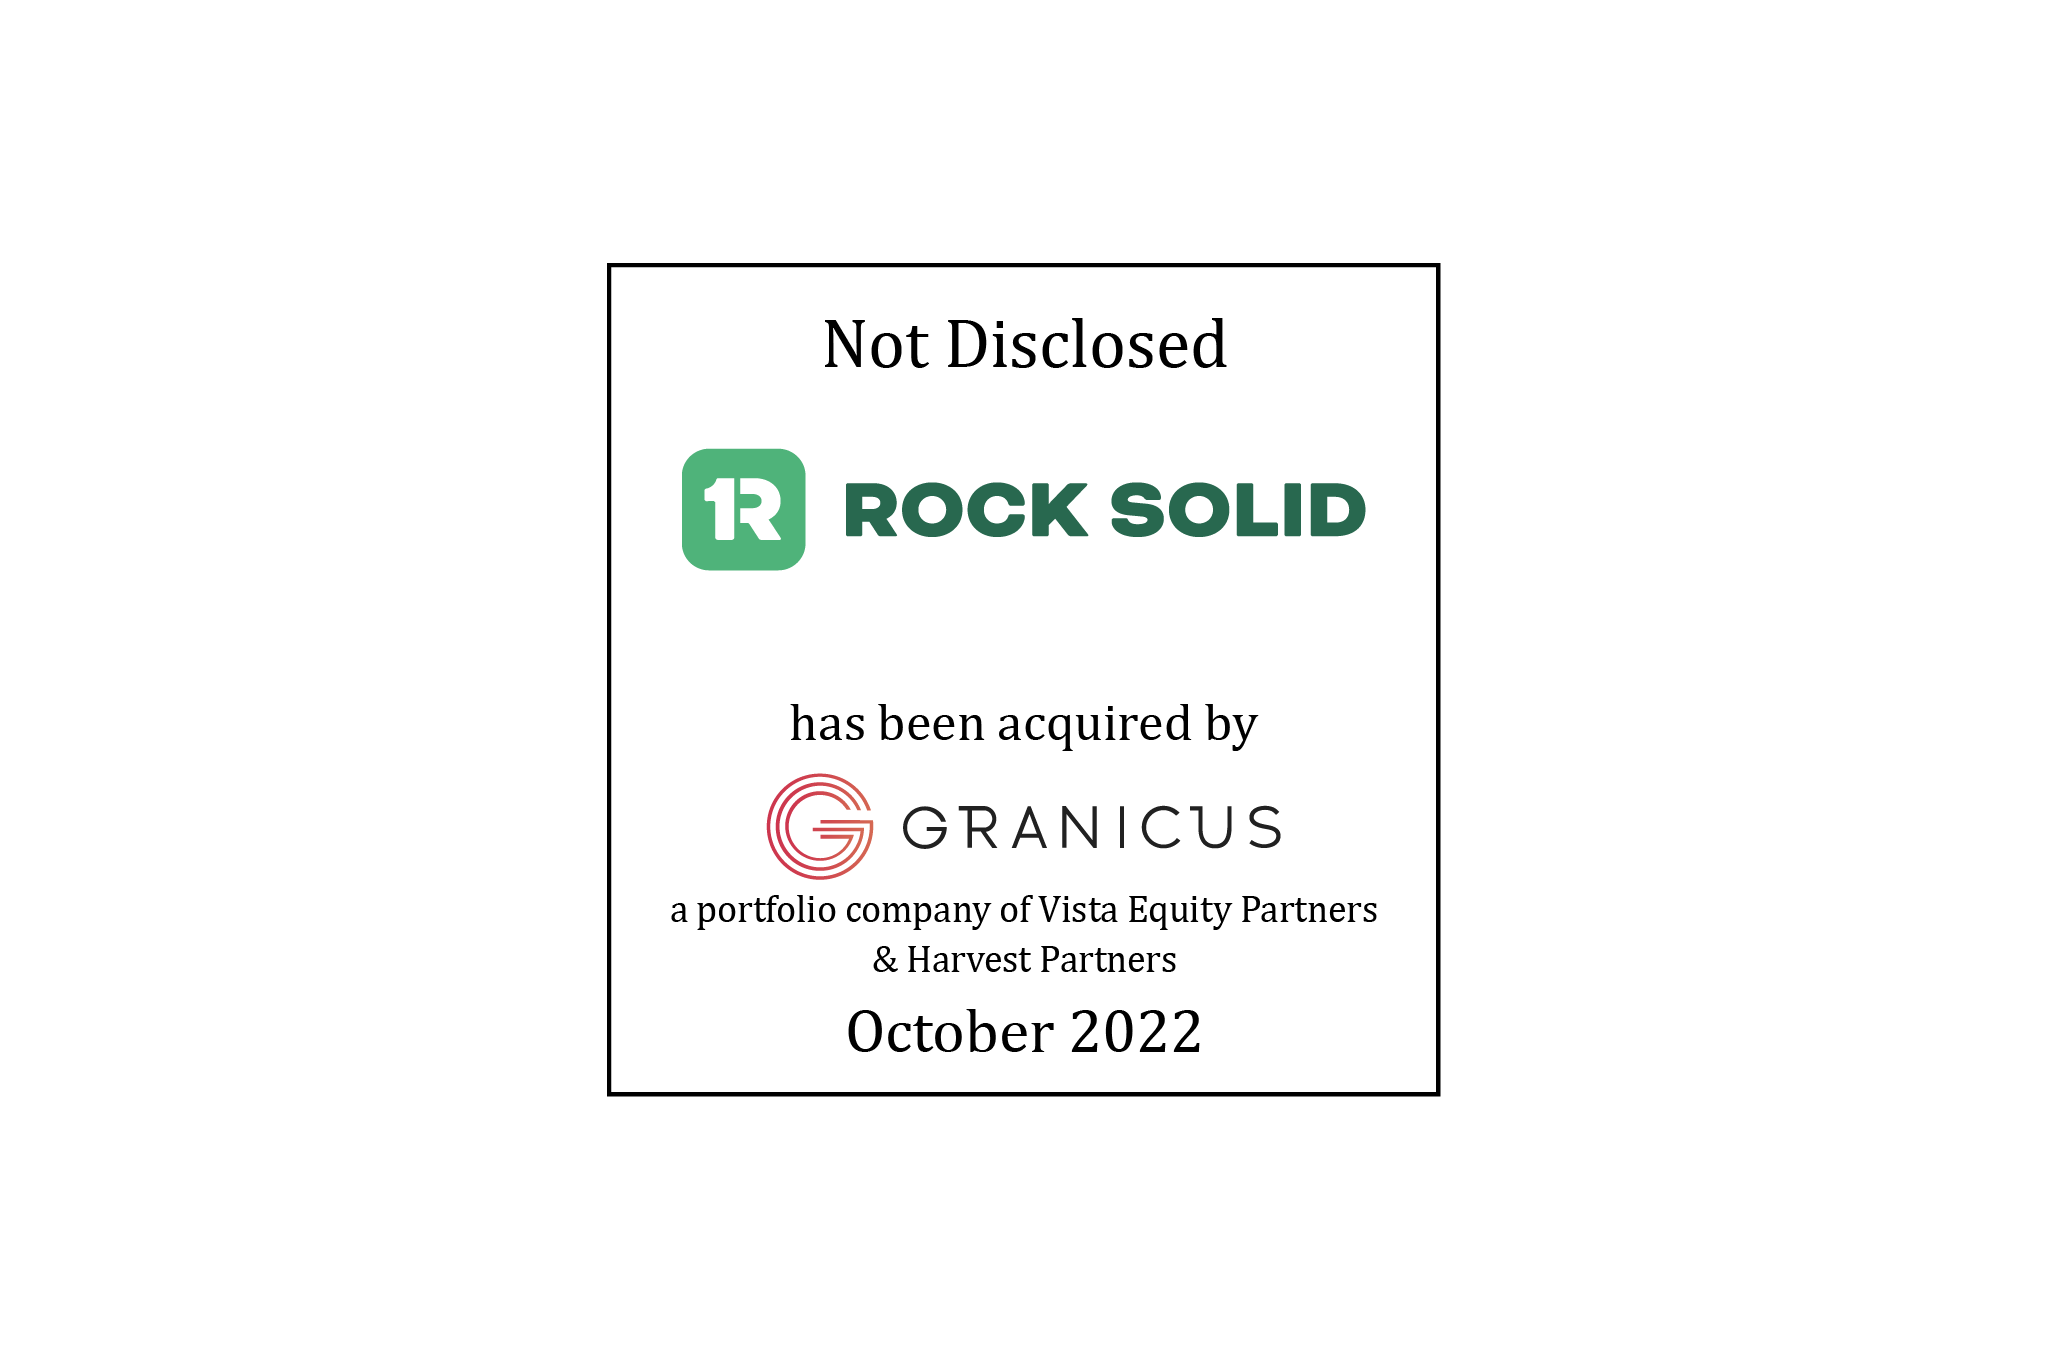 Not Disclosed | Rock Solid (logo) Has Been Acquired by Granicus (logo), a portfolio company of Vista Equity Partners and Harvest Partners | October 2022  